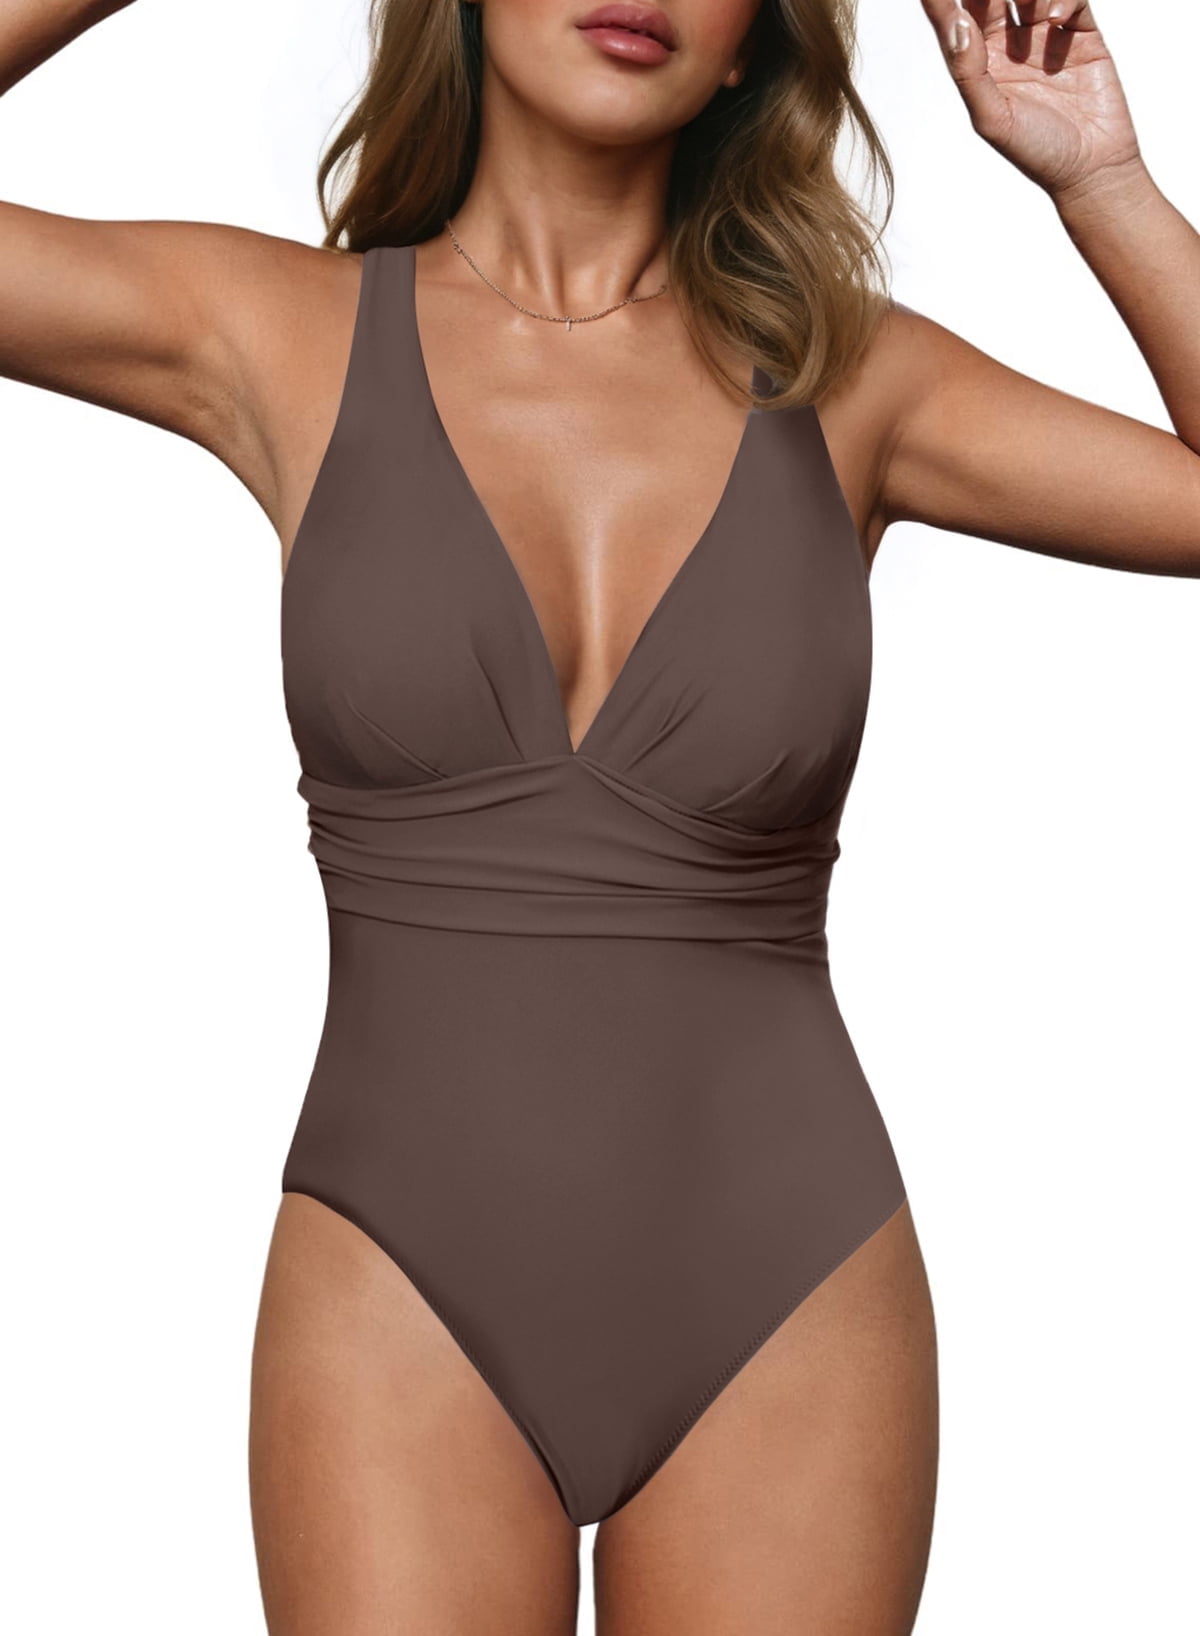 SHEWIN Swimsuit Women One Piece Tummy Control Bathing Suits Sexy V Neck  Ruched Tummy Control Criss Cross Back High Waisted Swimwear Gray XL 